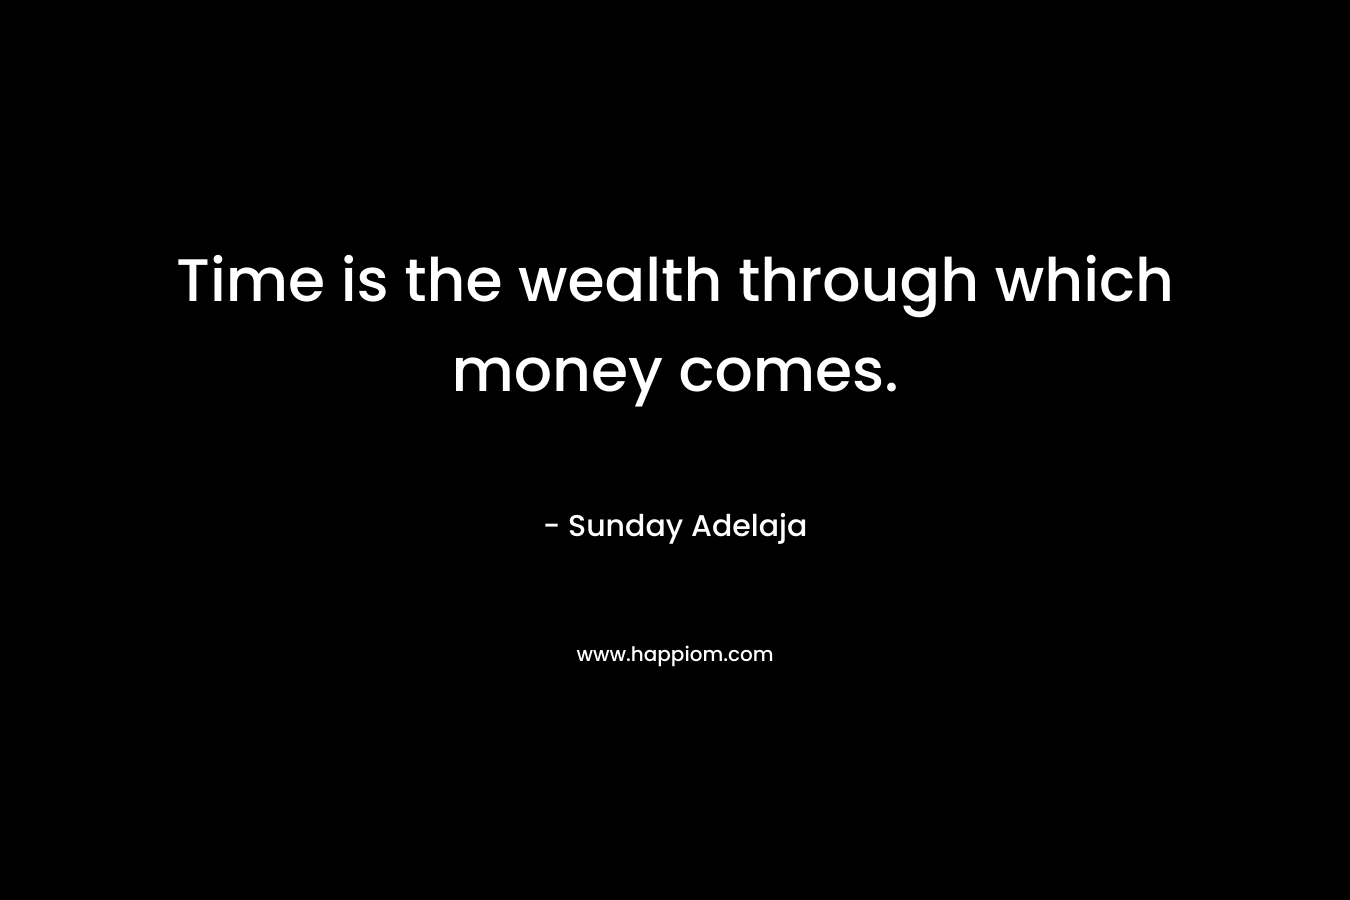 Time is the wealth through which money comes.